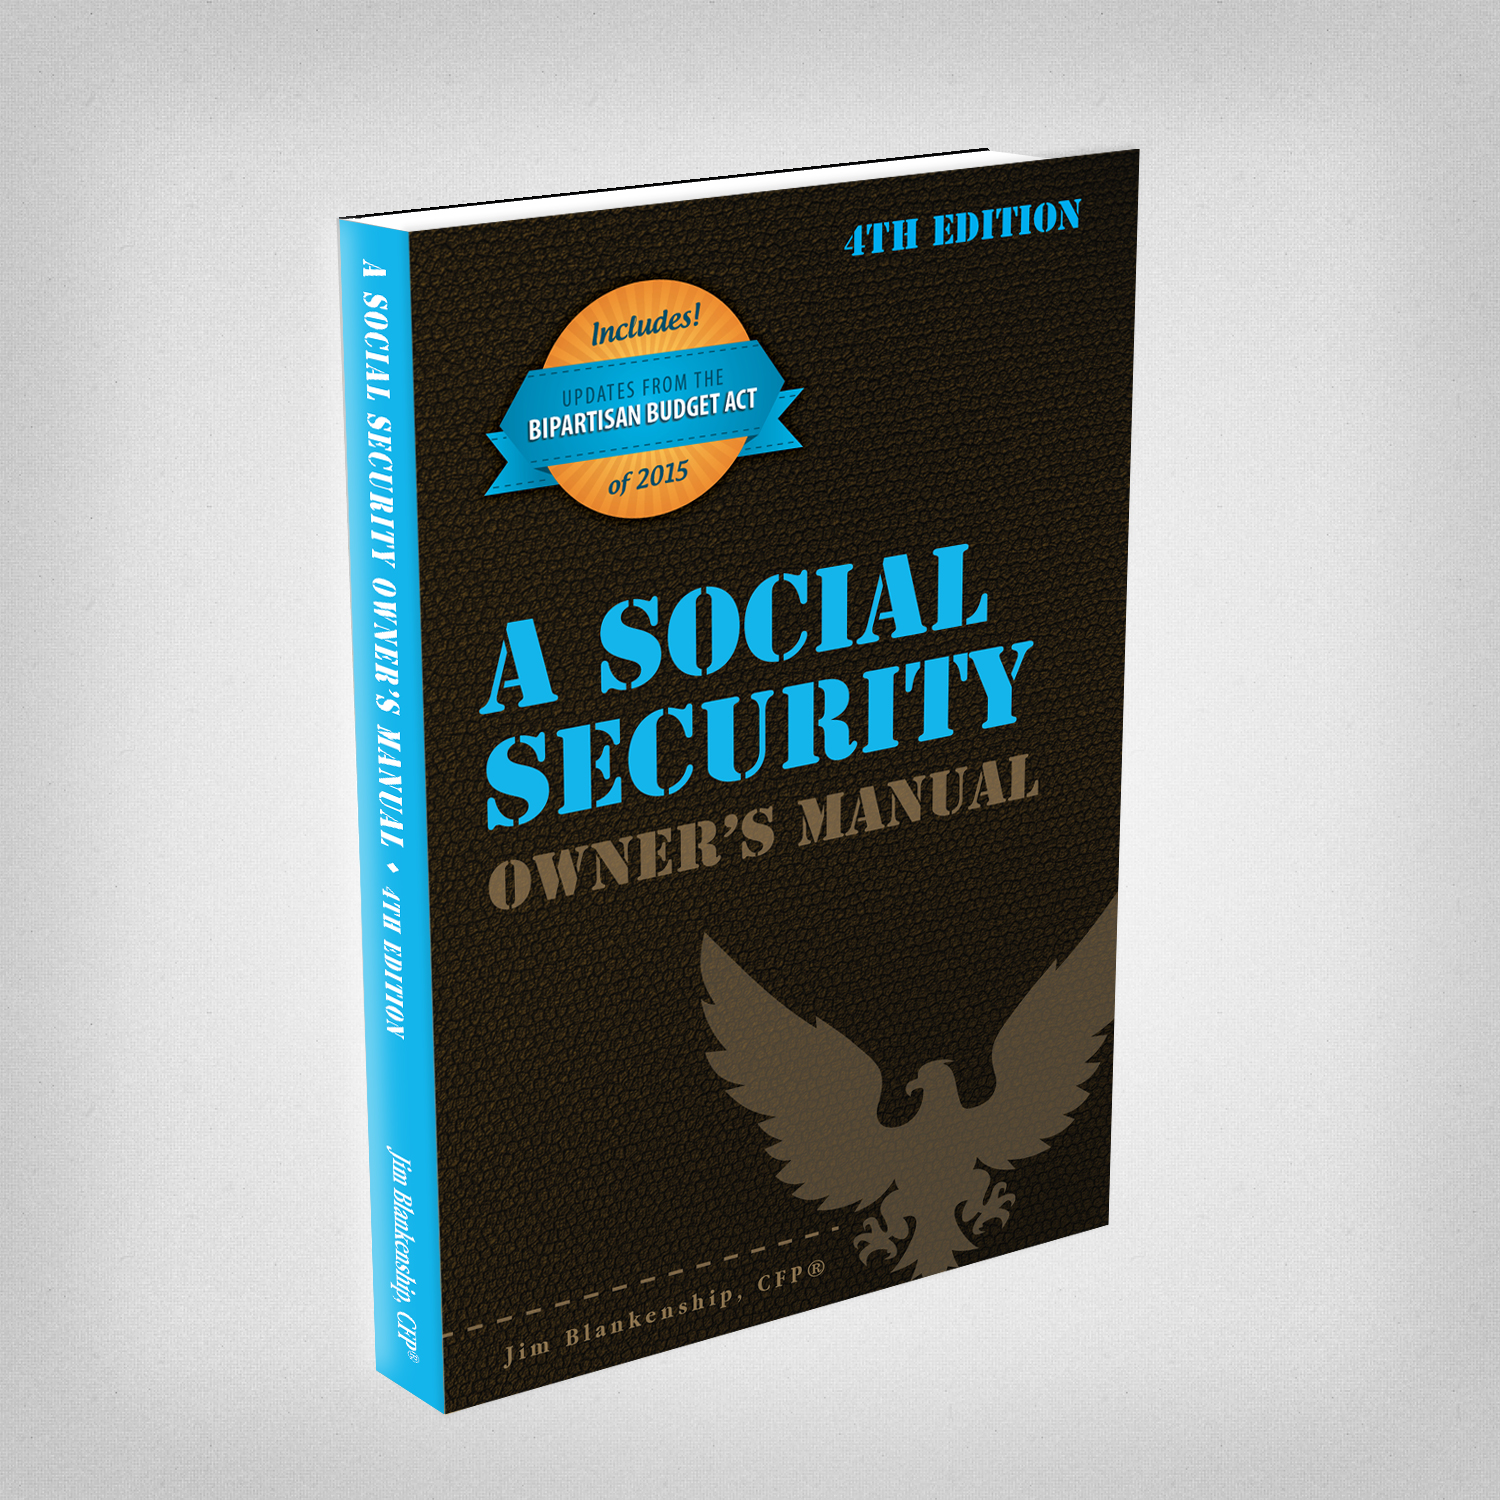 A Social Security Owner's Manual